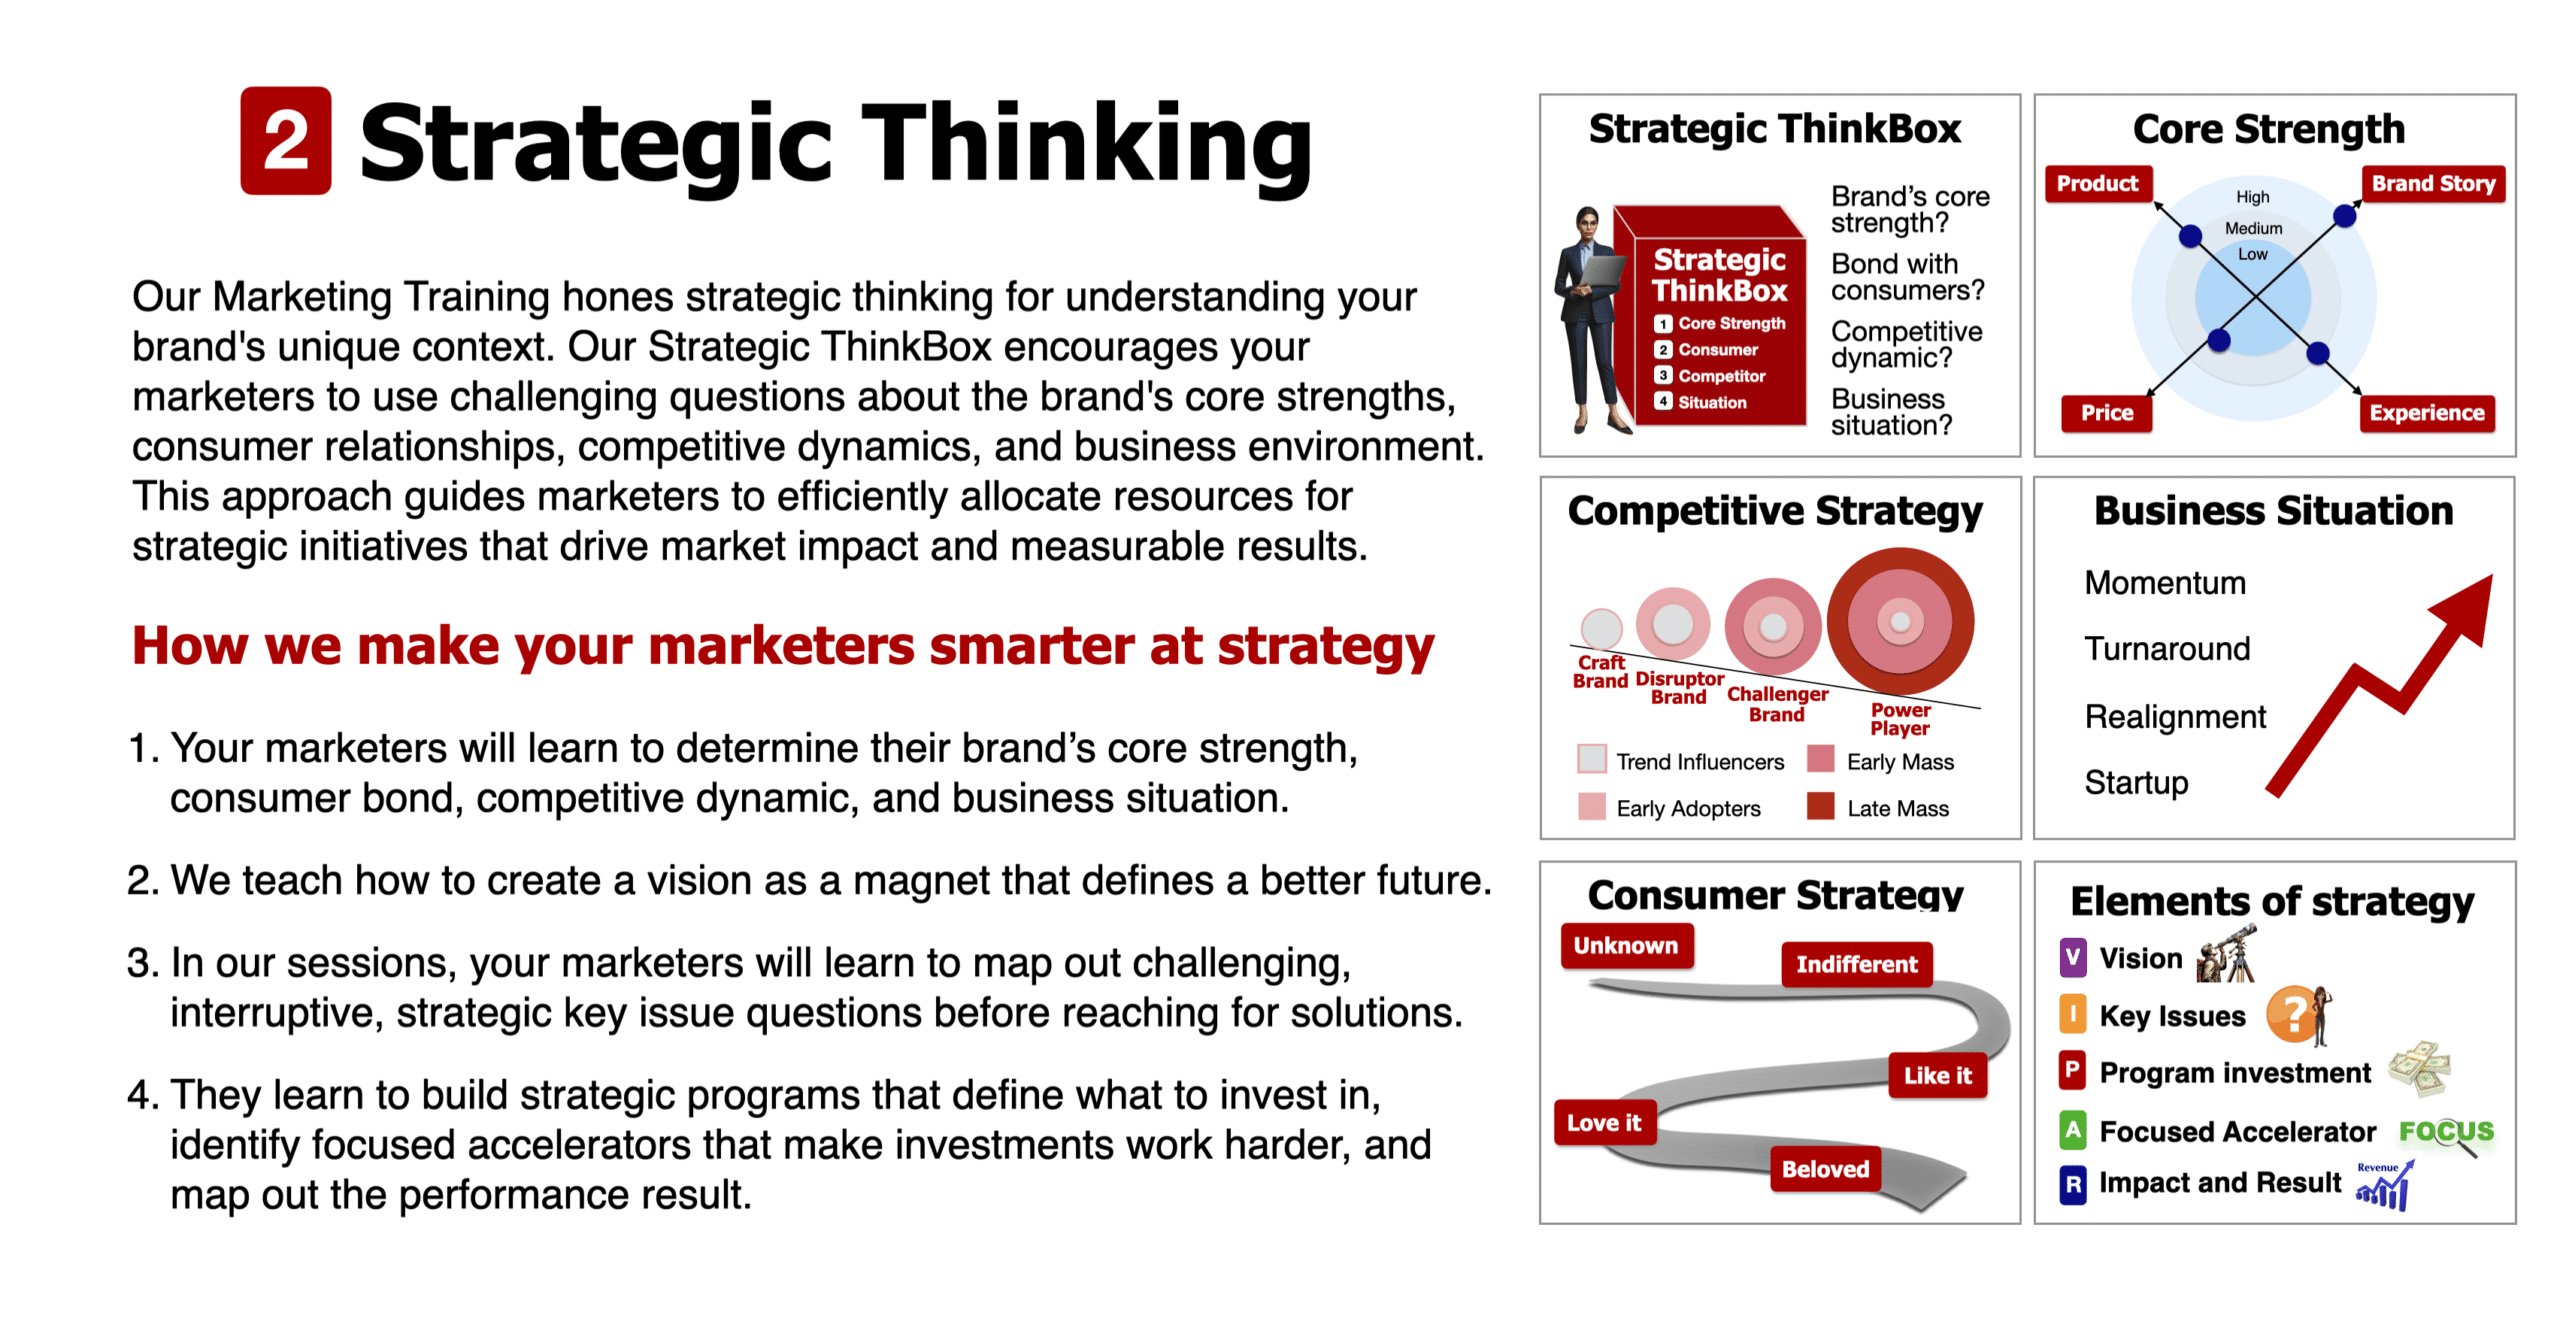 Strategic Thinking Tools we use in our Brand Management Training